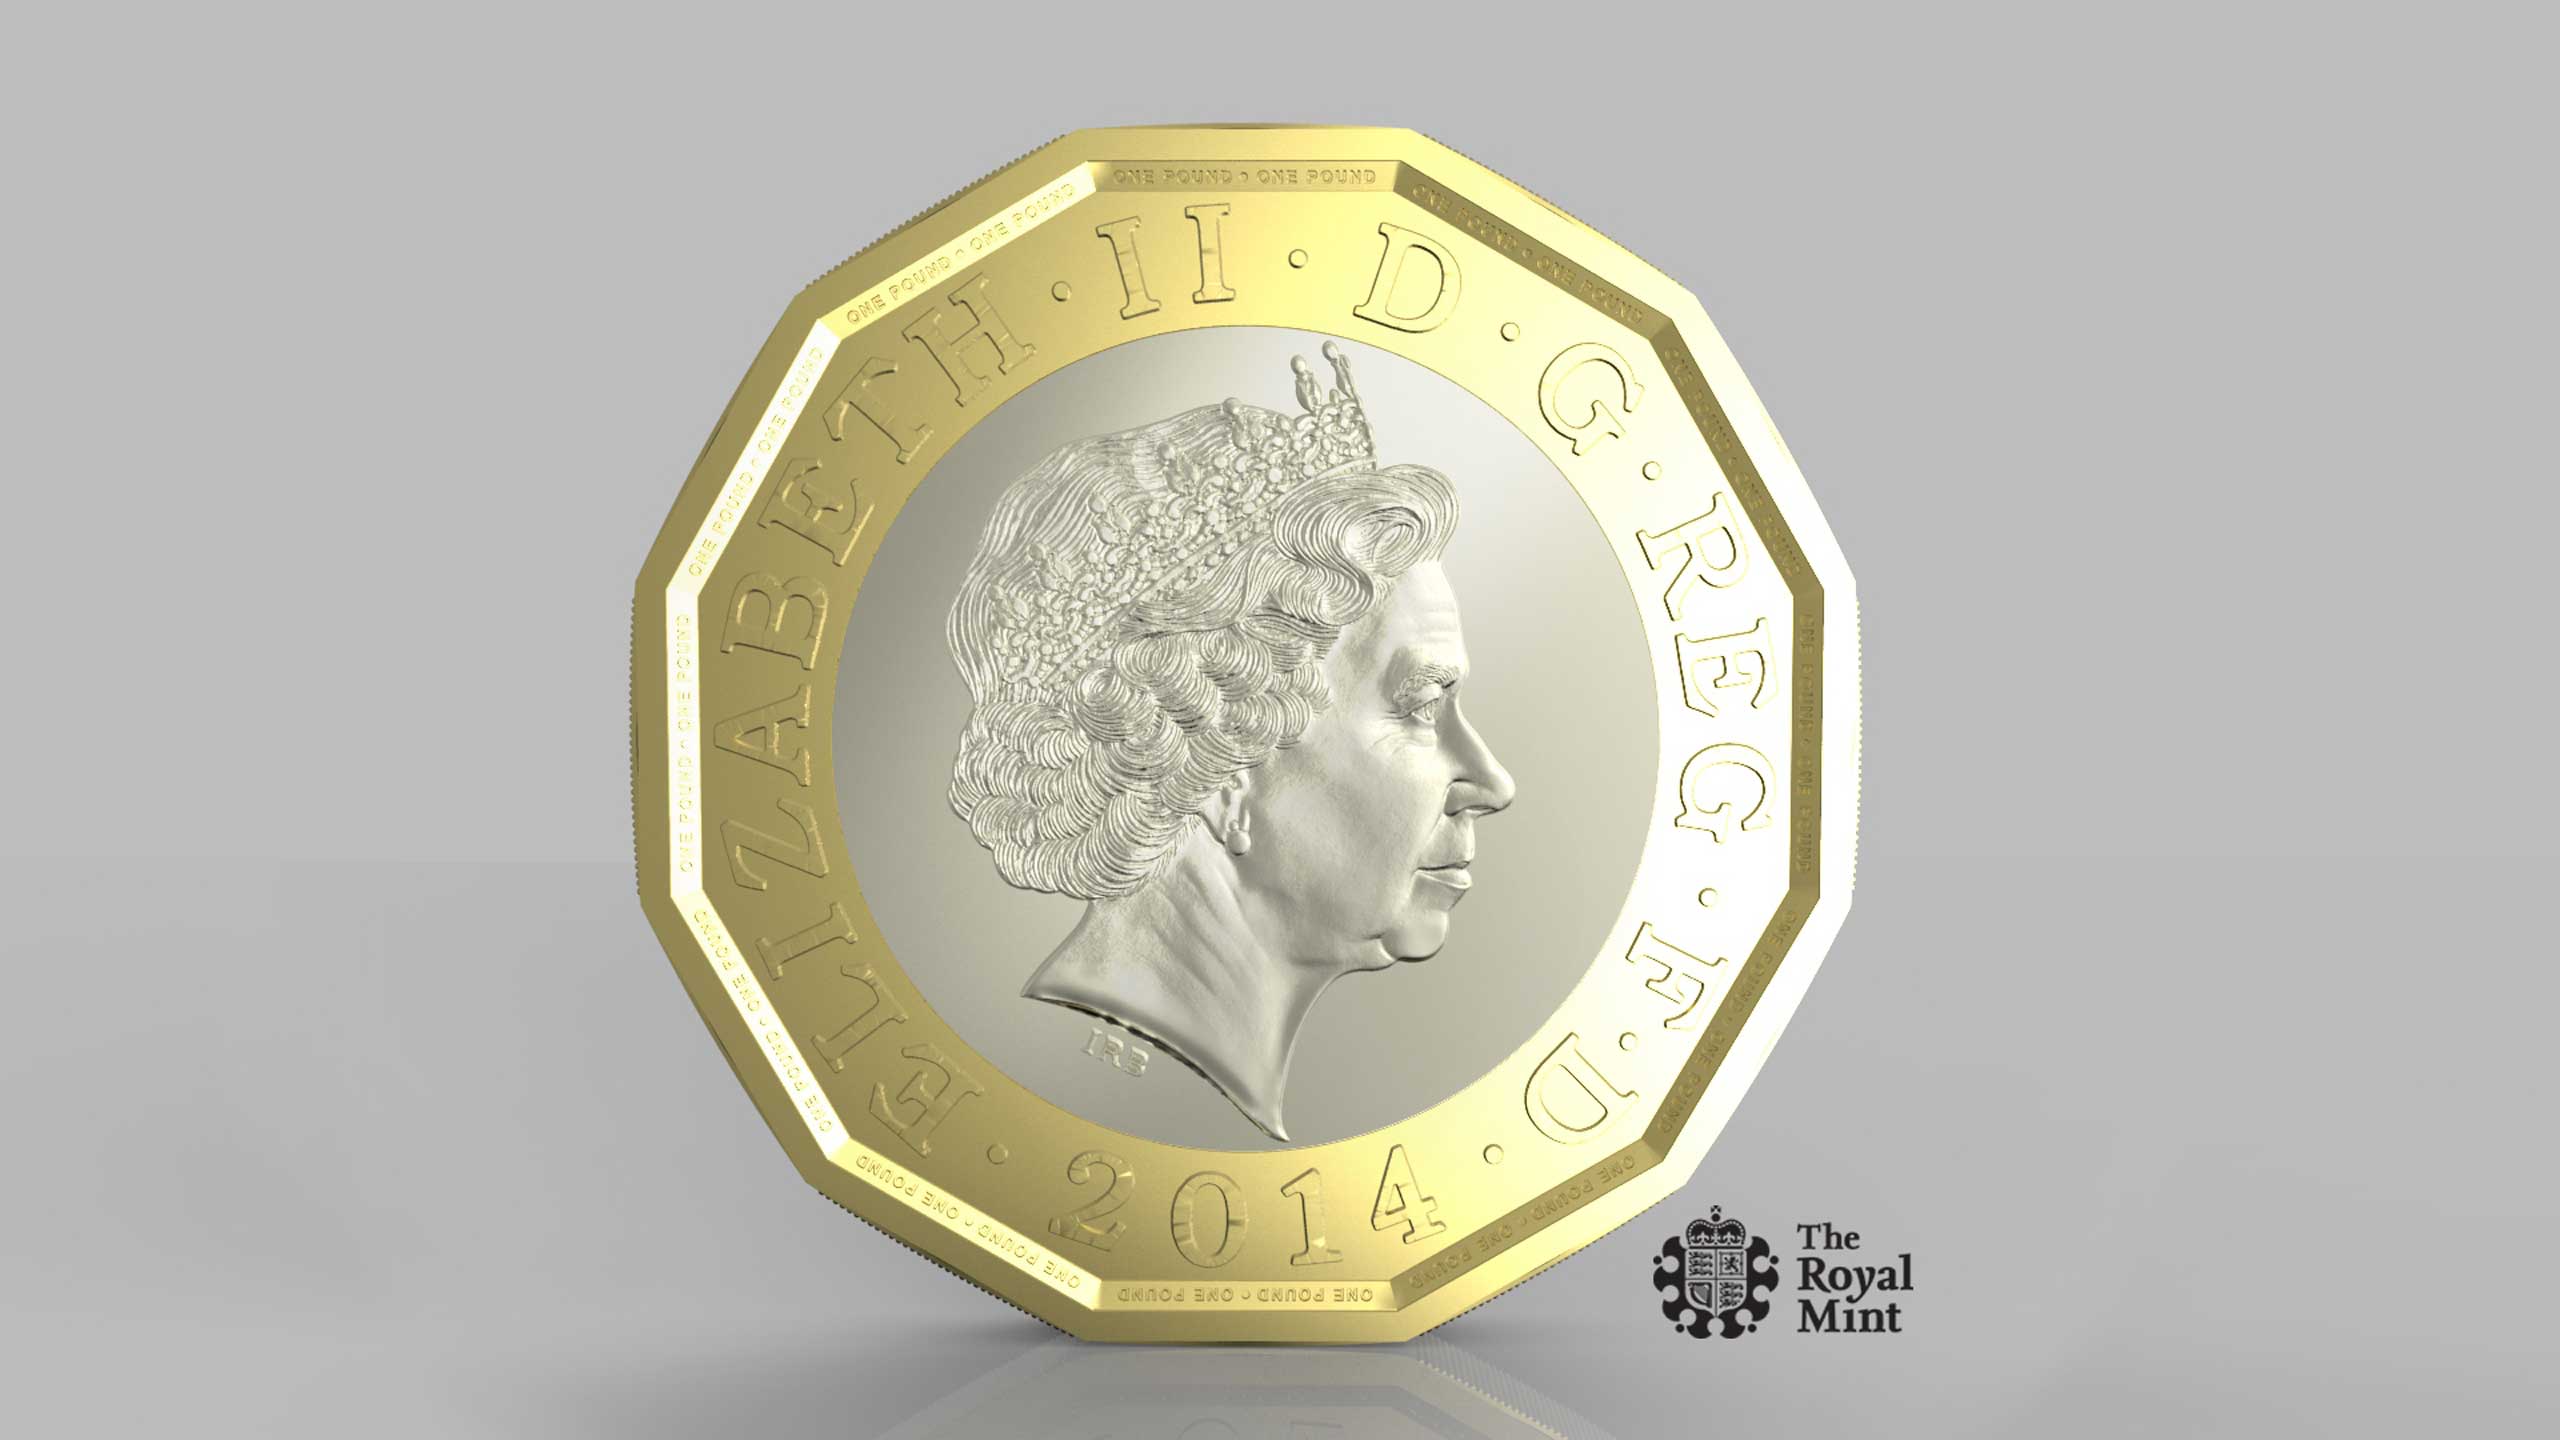 This photo issued by HM Treasury shows the side of a new one pound coin announced by the Government. (The Royal Mint&mdash;AP)